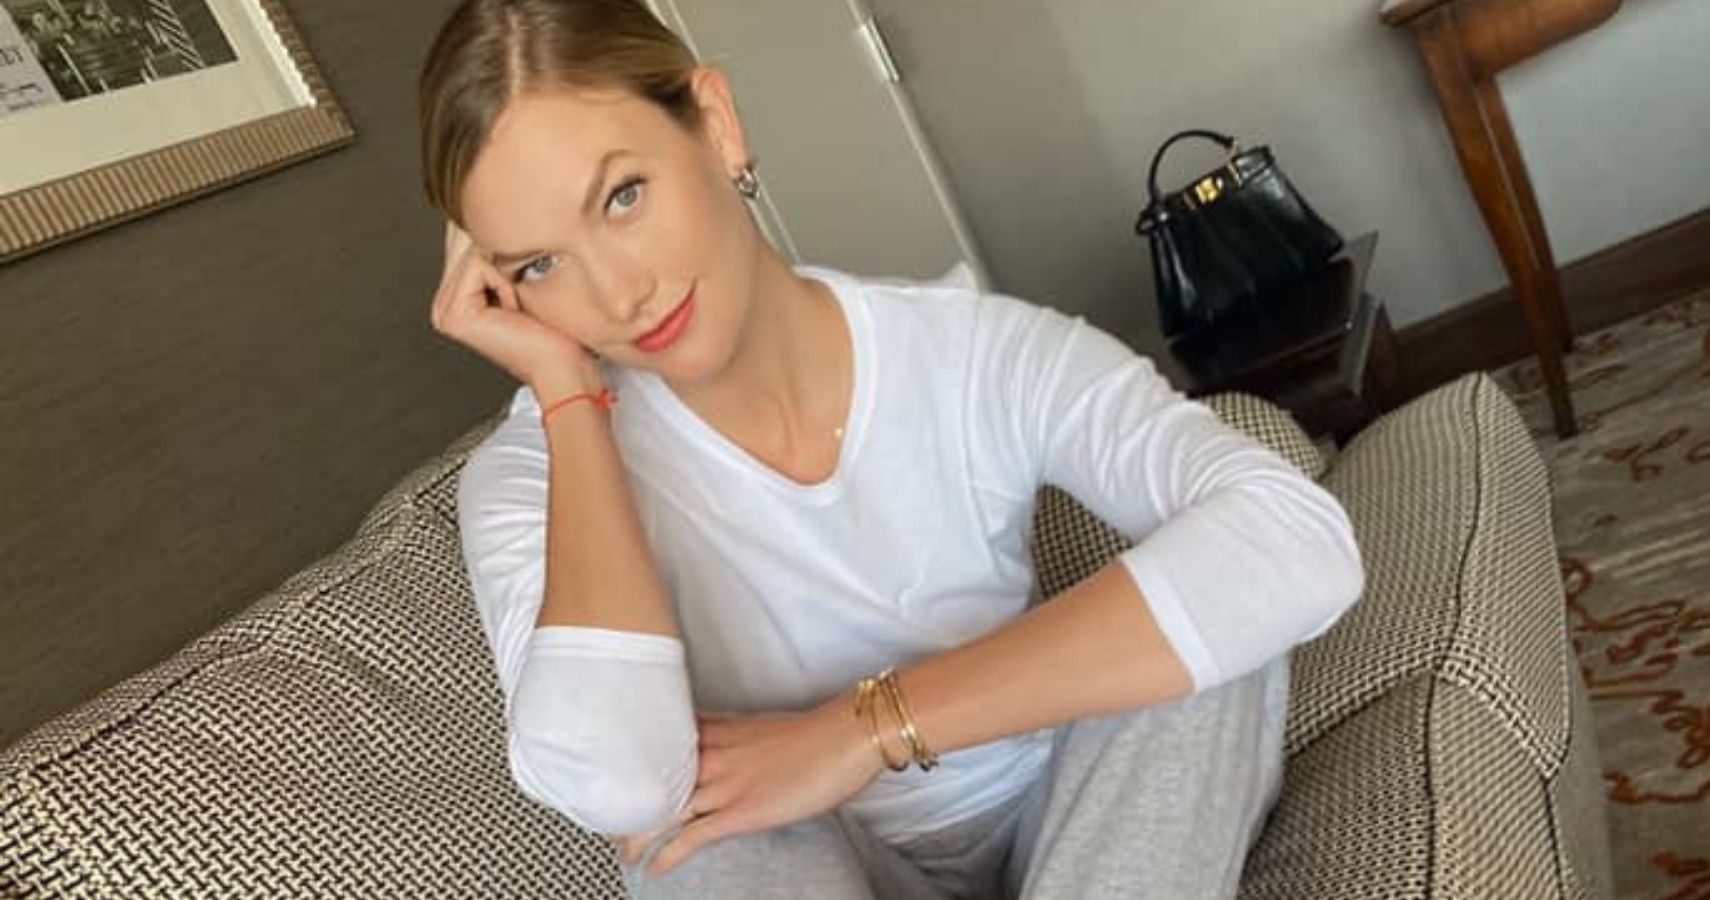 Karlie Kloss confirms pregnancy with baby bump photo